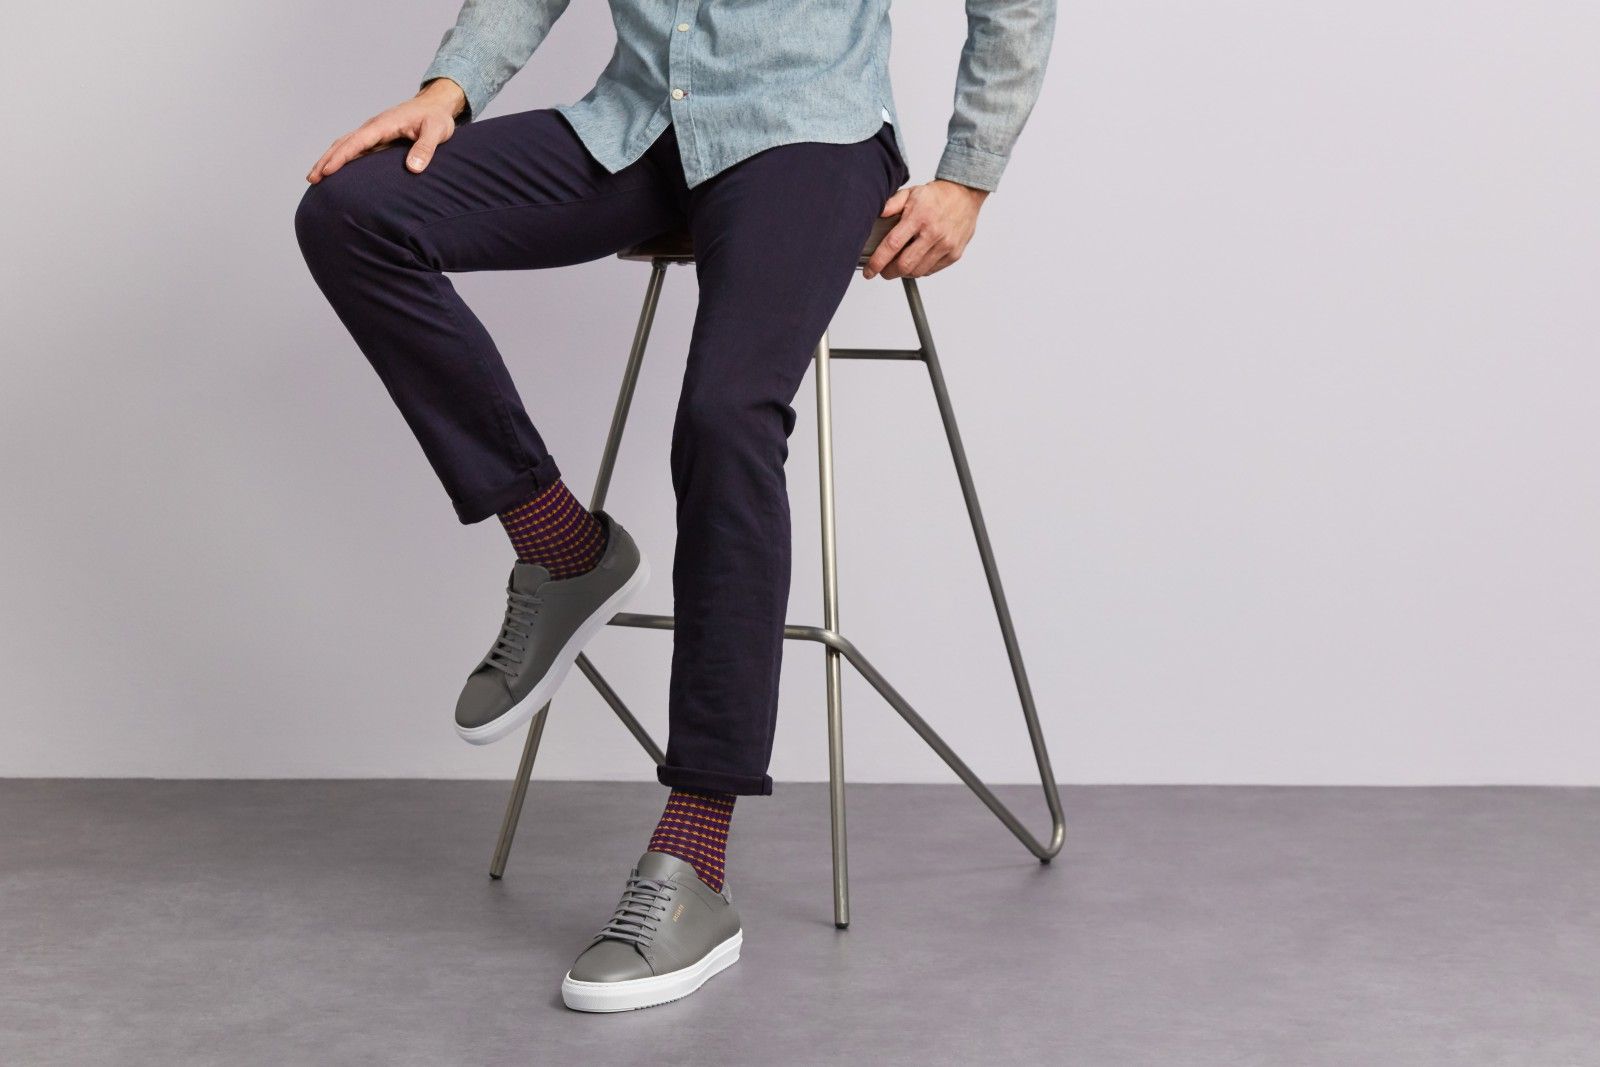 A man sitting on a stool wearing a light blue shirt, navy trousers, red pattern socks from London Sock Company, and grey trainers.